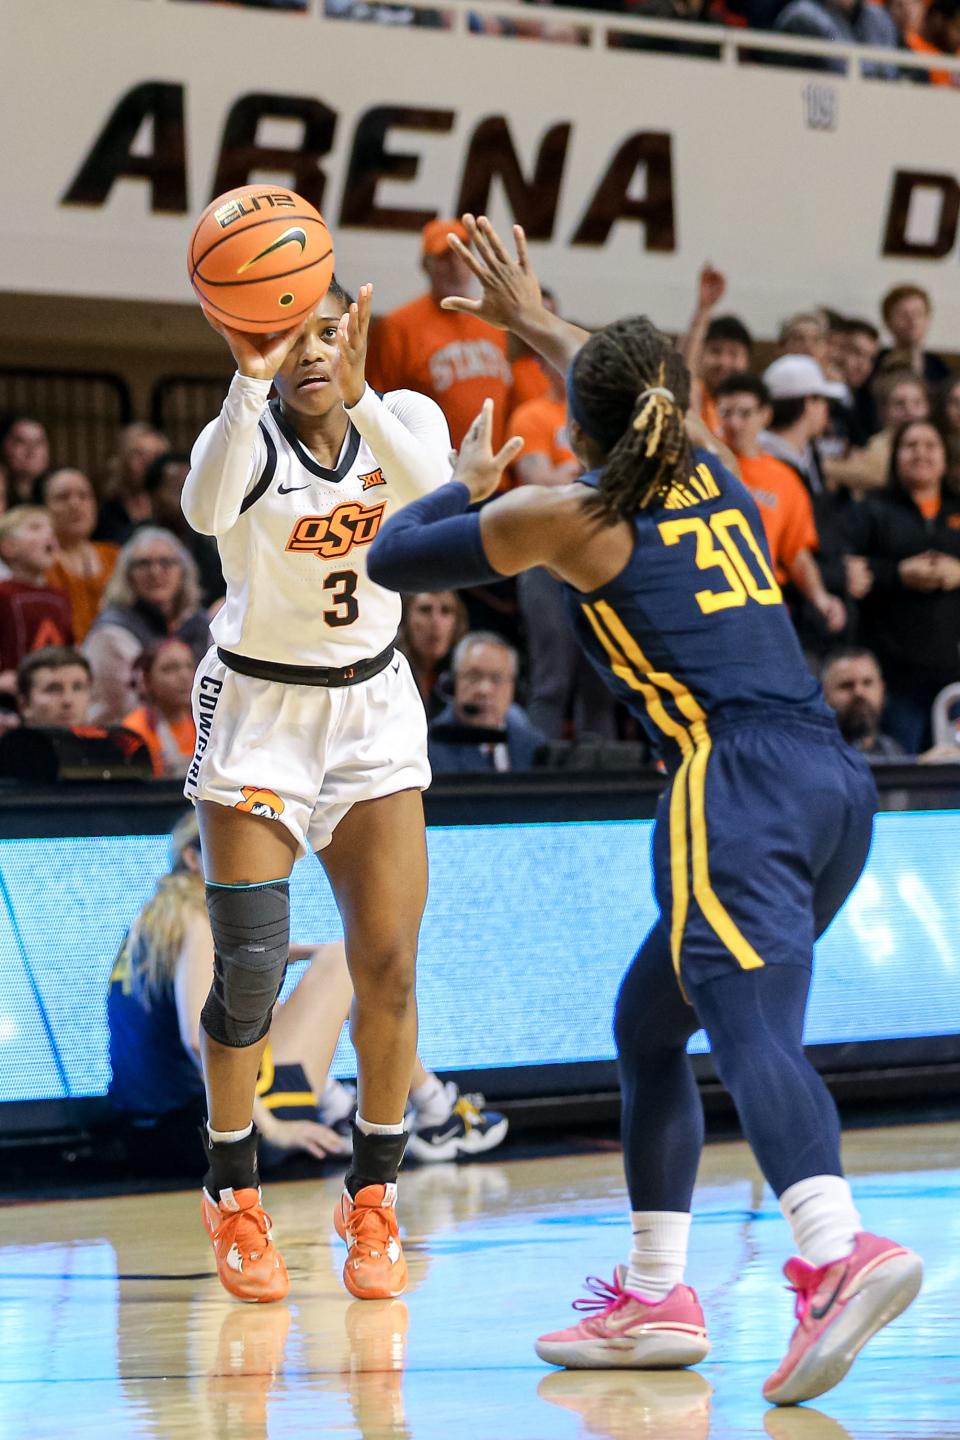 Oklahoma State guard Naomie Alnatas (3) shoots for three over West Virginia guard Madisen Smith (30) in the first half during a women’s college basketball game between the Oklahoma State Cowgirls (OSU) and the West Virgina Mountaineers at Gallagher-Iba Arena in Stillwater, Okla., on Tuesday, Feb. 7, 2023.